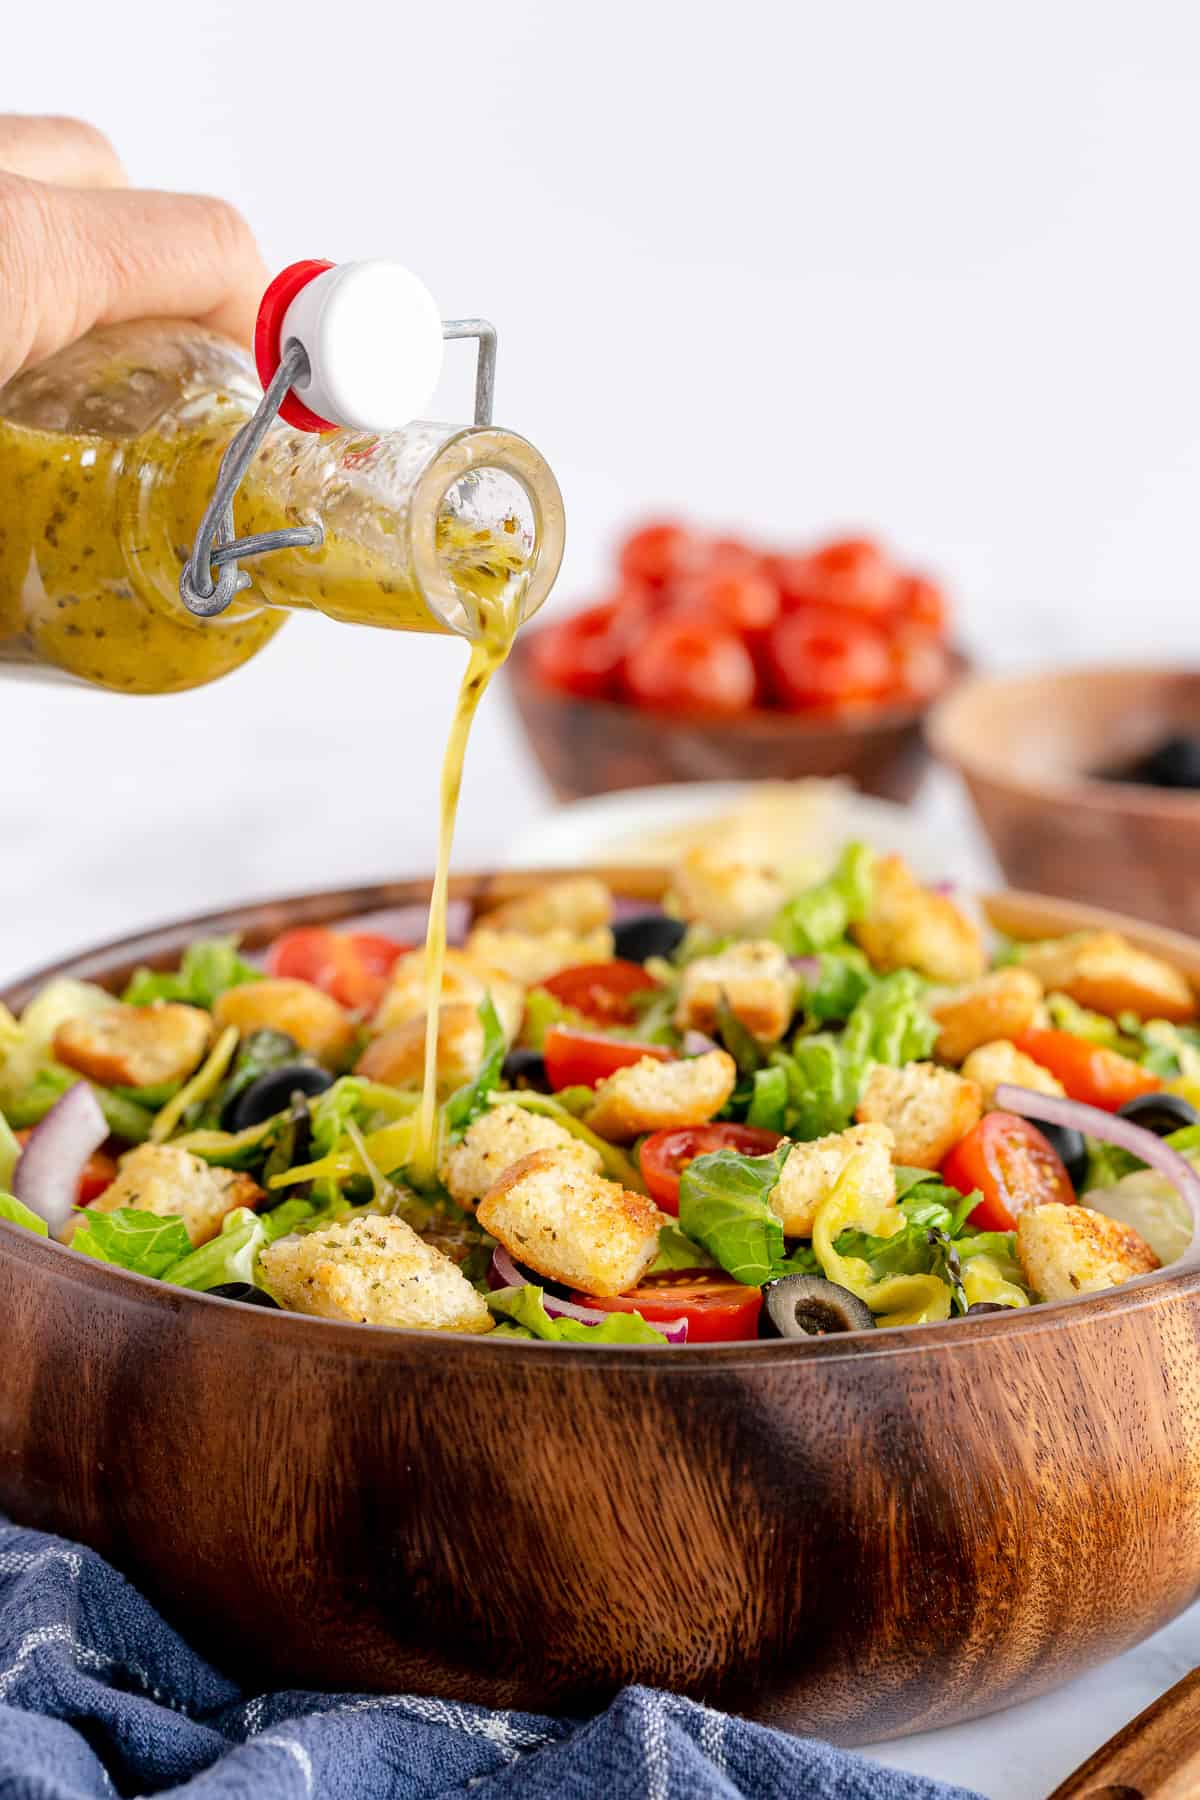 Italian dressing pouring from a bottle on to a salad in a wood bowl.